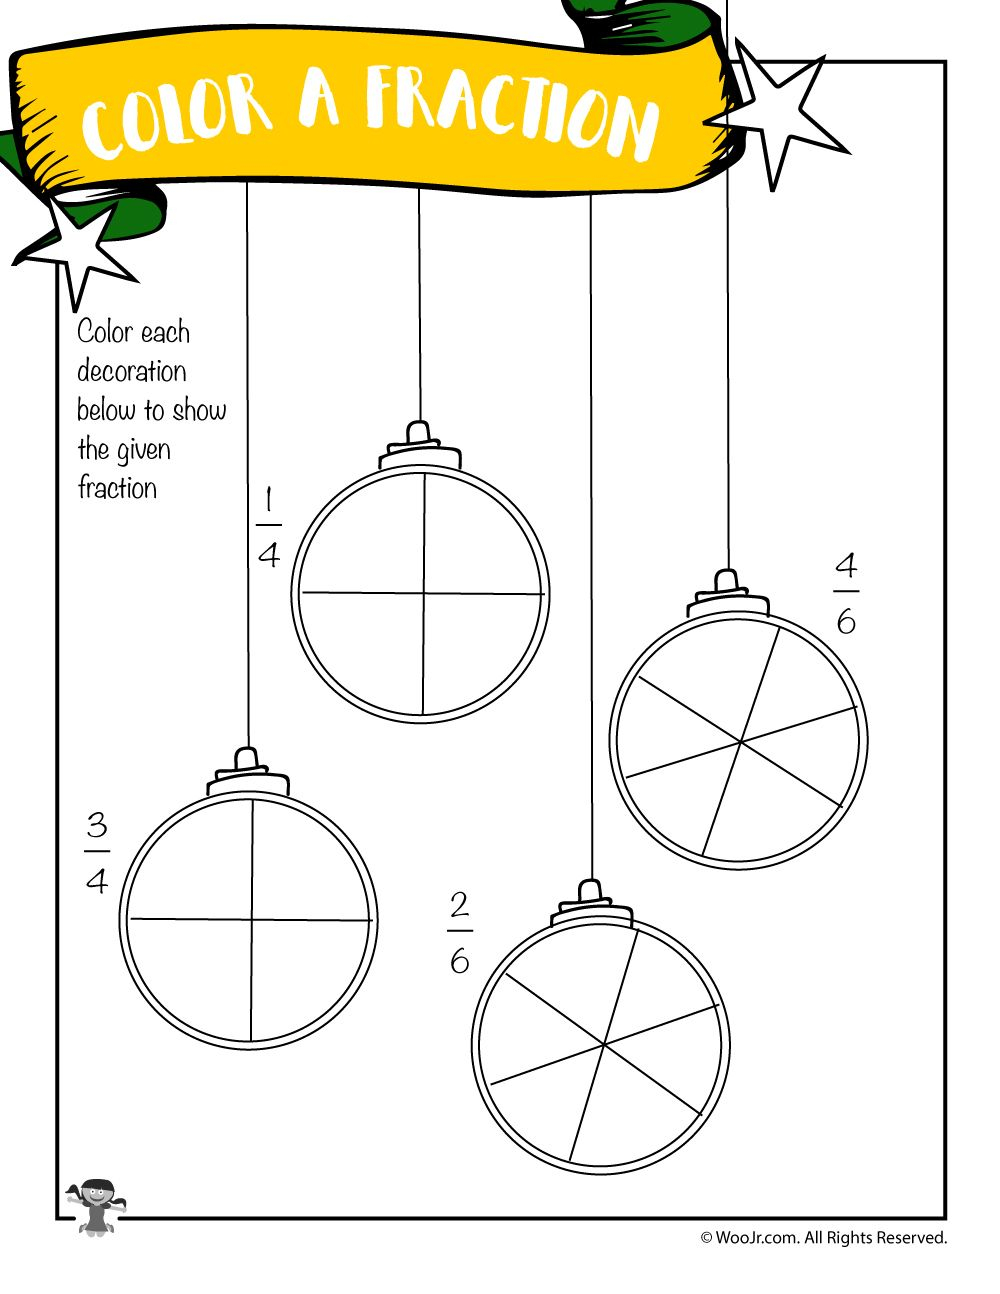 Color The Fraction Worksheet With Christmas Ornaments | Woo